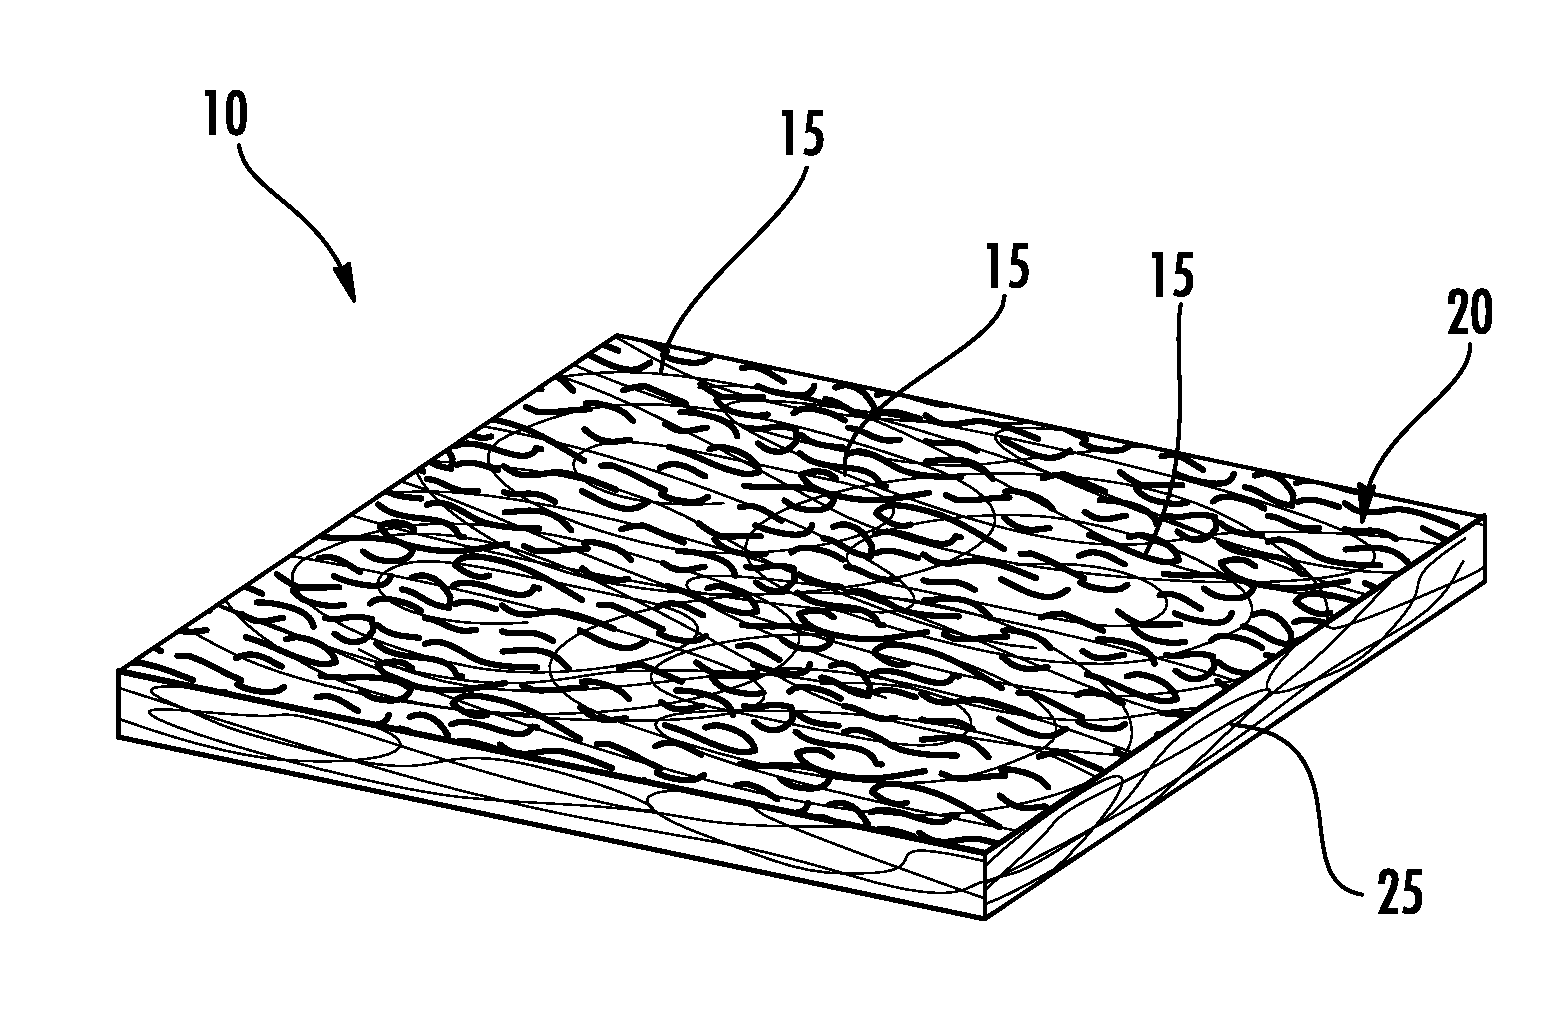 Methods of Applying Skin Wellness Agents to a Nonwoven Web Through Electrospinning Nanofibers